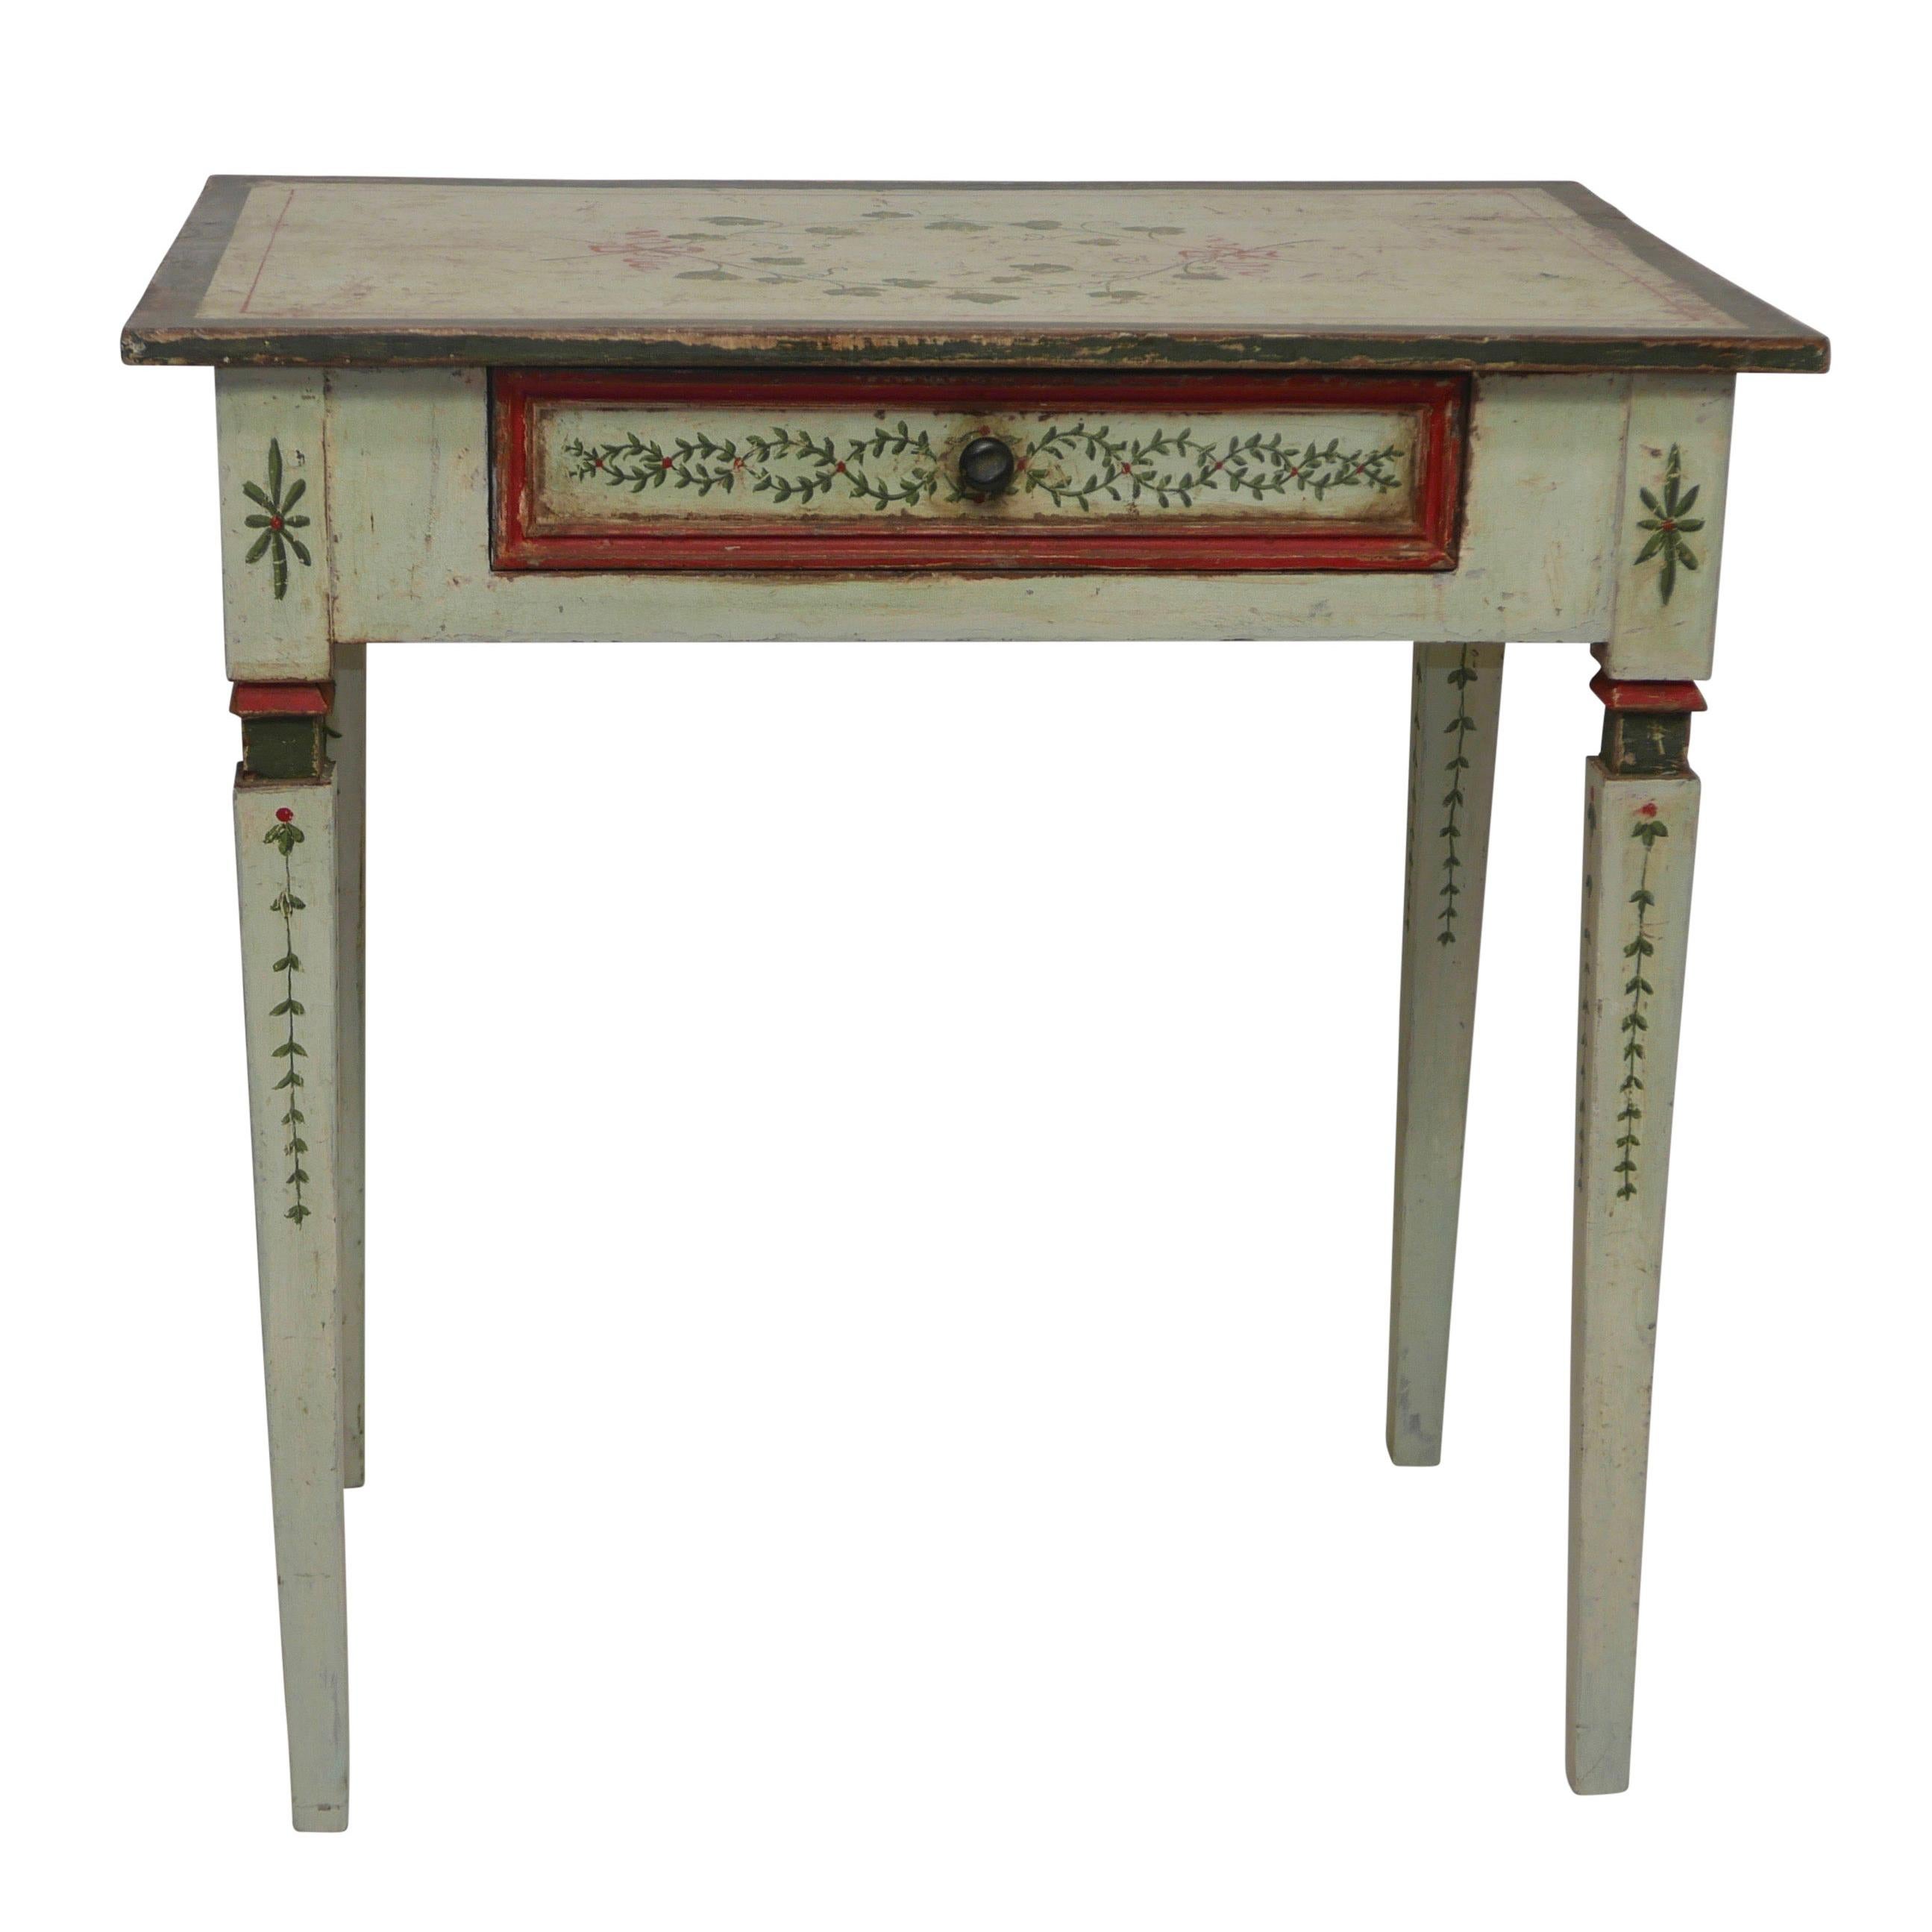 Italian Painted Writing Table, Desk, Side Table, Early 19th Century